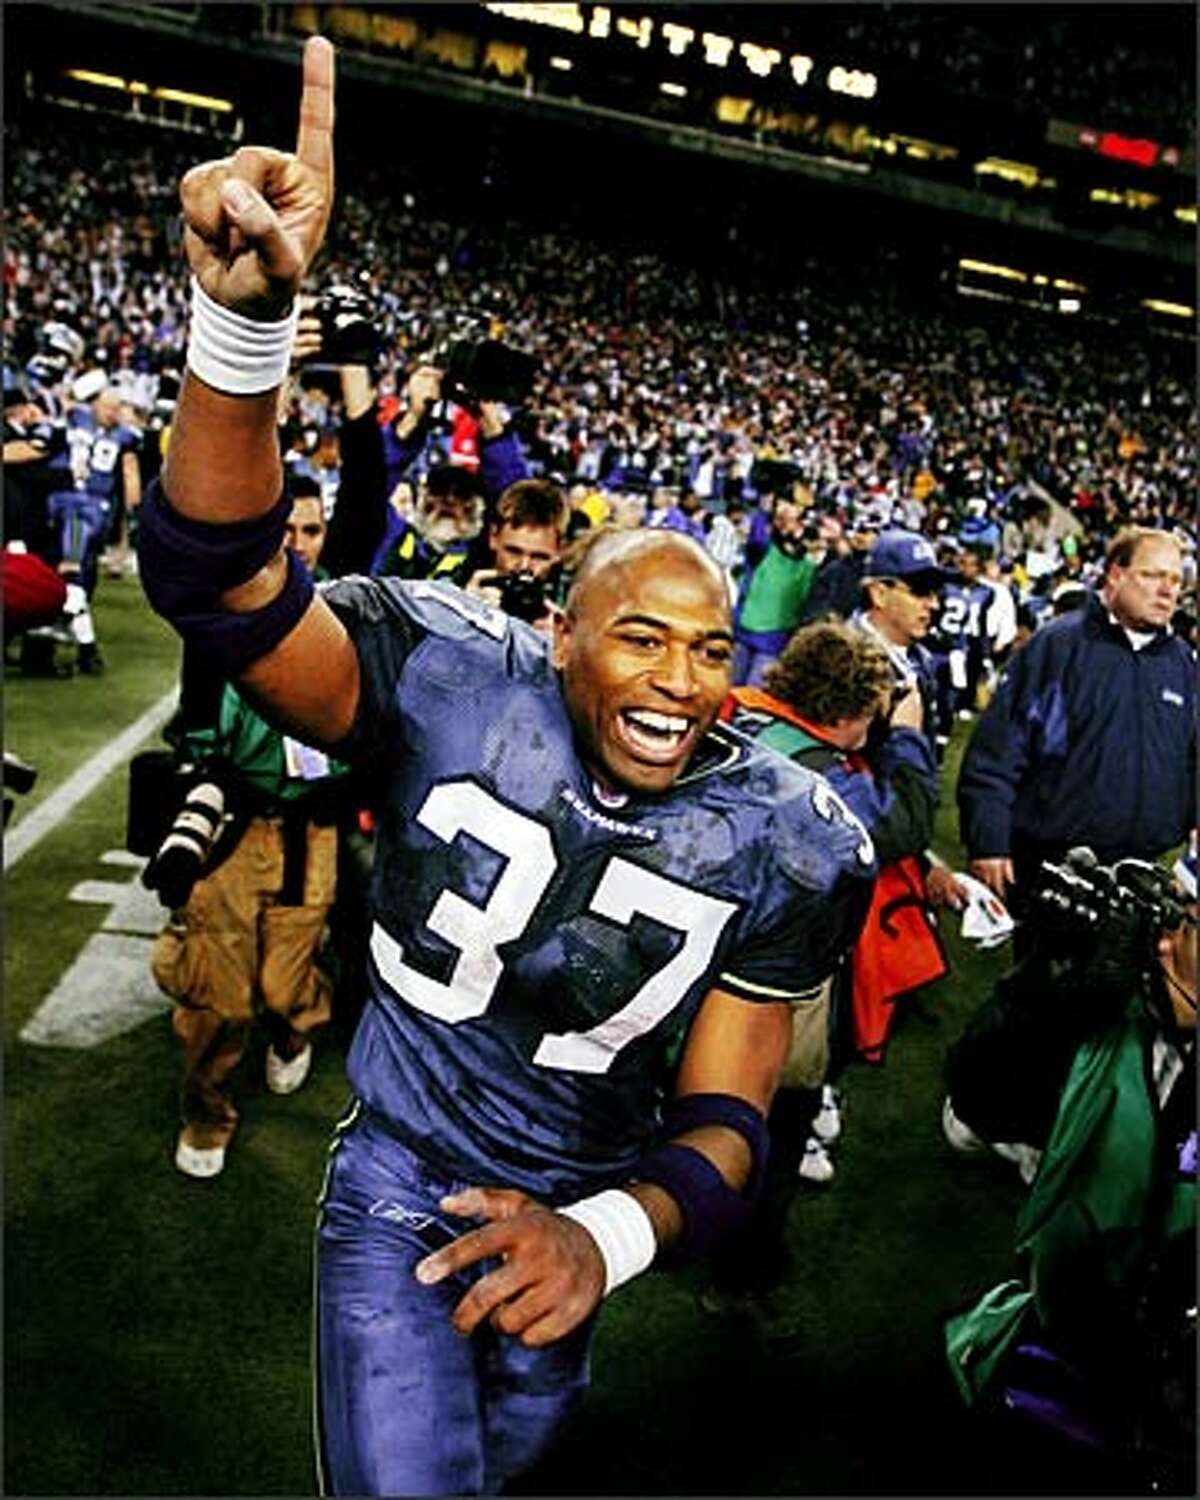 Running back Shaun Alexander runs onto the field to celebrate the Seahawks' NFC Championship victory after time expires.Eklund: One of the high points in Seattle sports history. It was nice to get that moment of exhilaration from the NFL MVP Shaun Alexander. It was a fun day to be at Qwest Field.